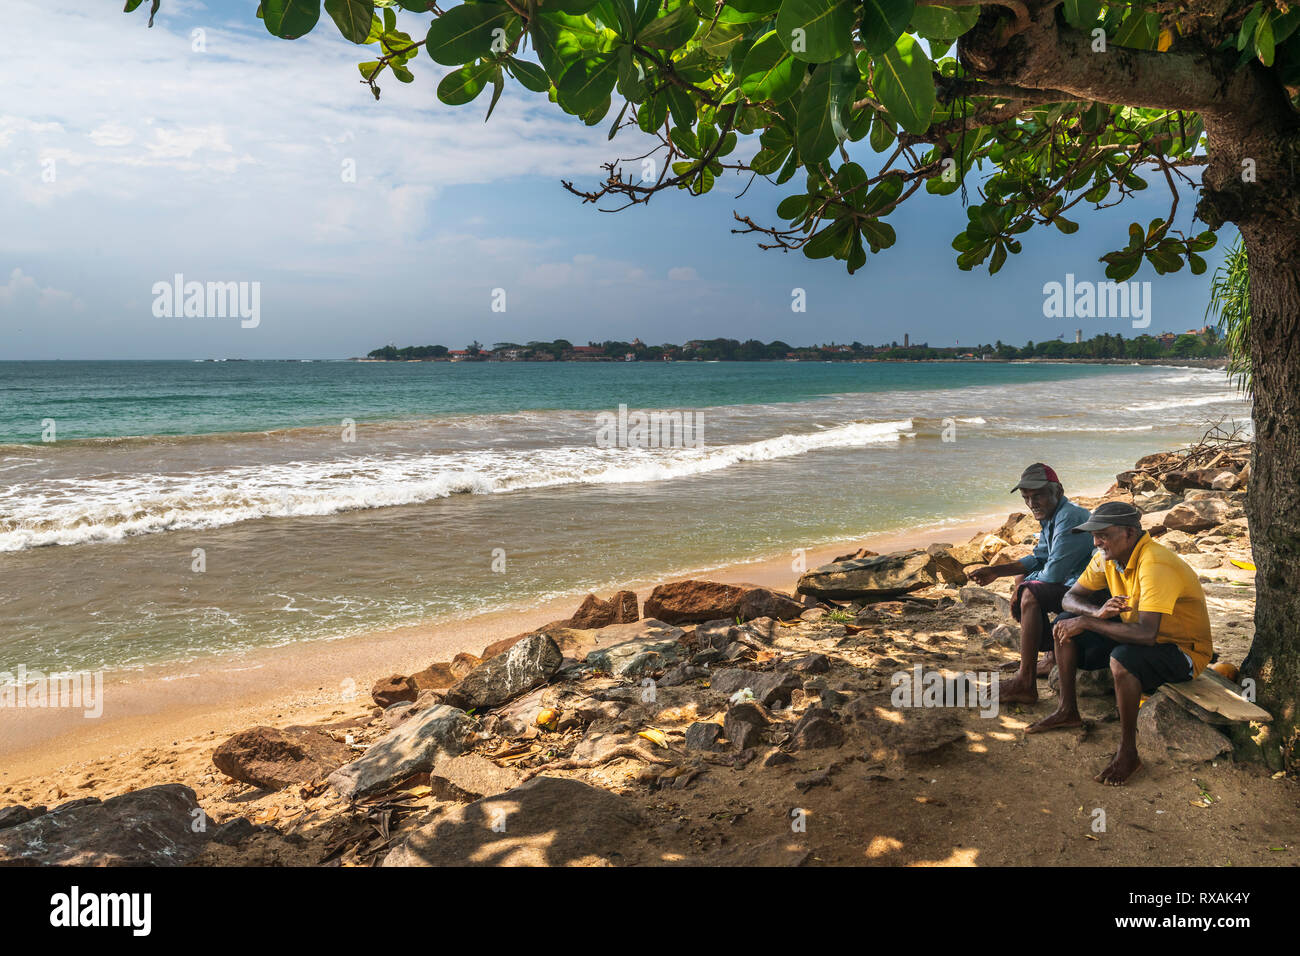 Two men take a break from the heat of the midday sun and chat together beneath the shade of a tree on the beach at Galle in the Southern Province of S Stock Photo